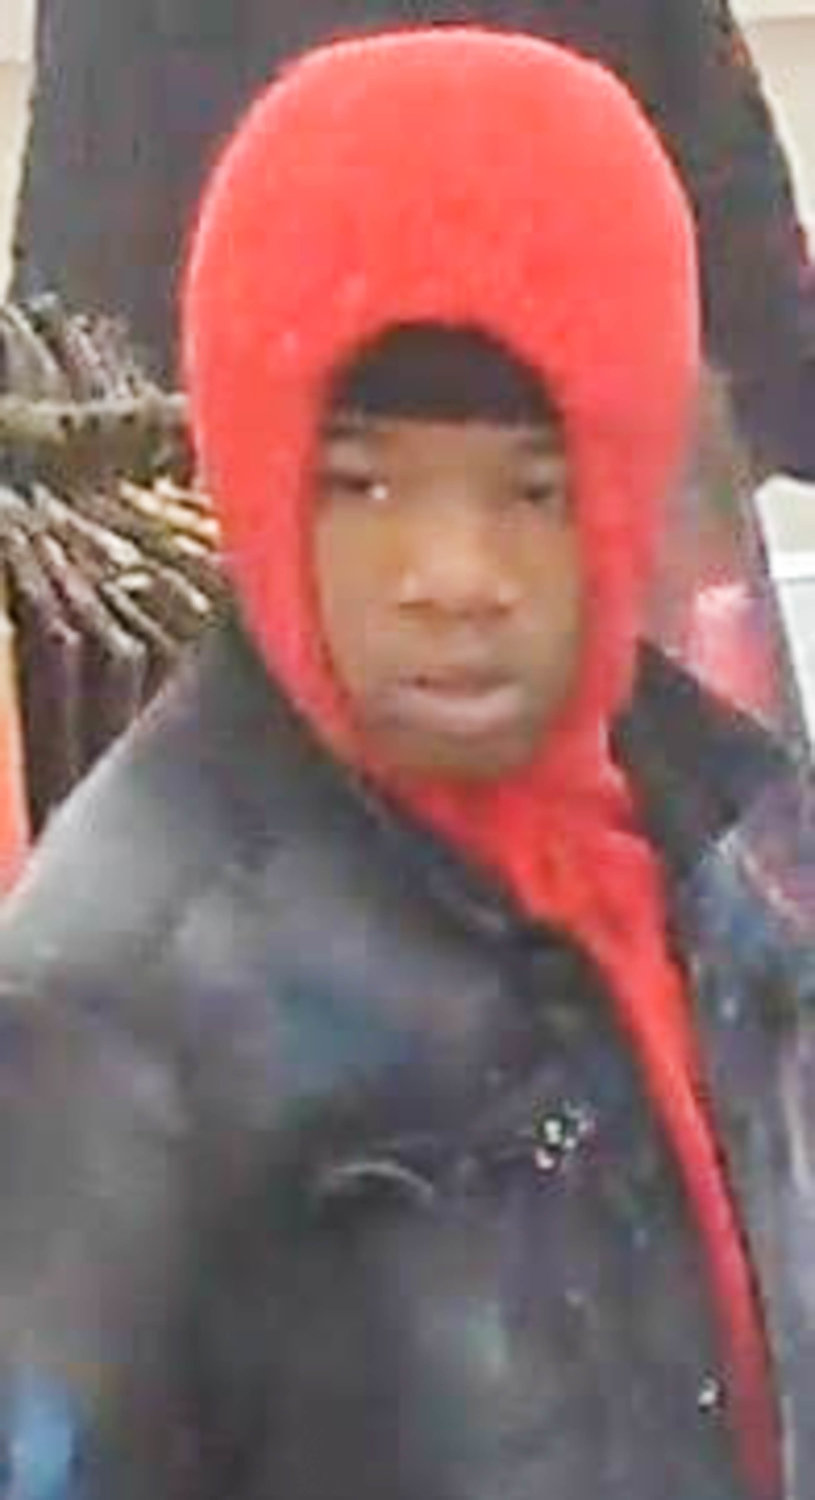 This man is suspected in a series of thefts and burglaries in the Yorkville area, according to the Yorkville Police Department. If you recognize him, you're asked to call the police at 315-736-8331.